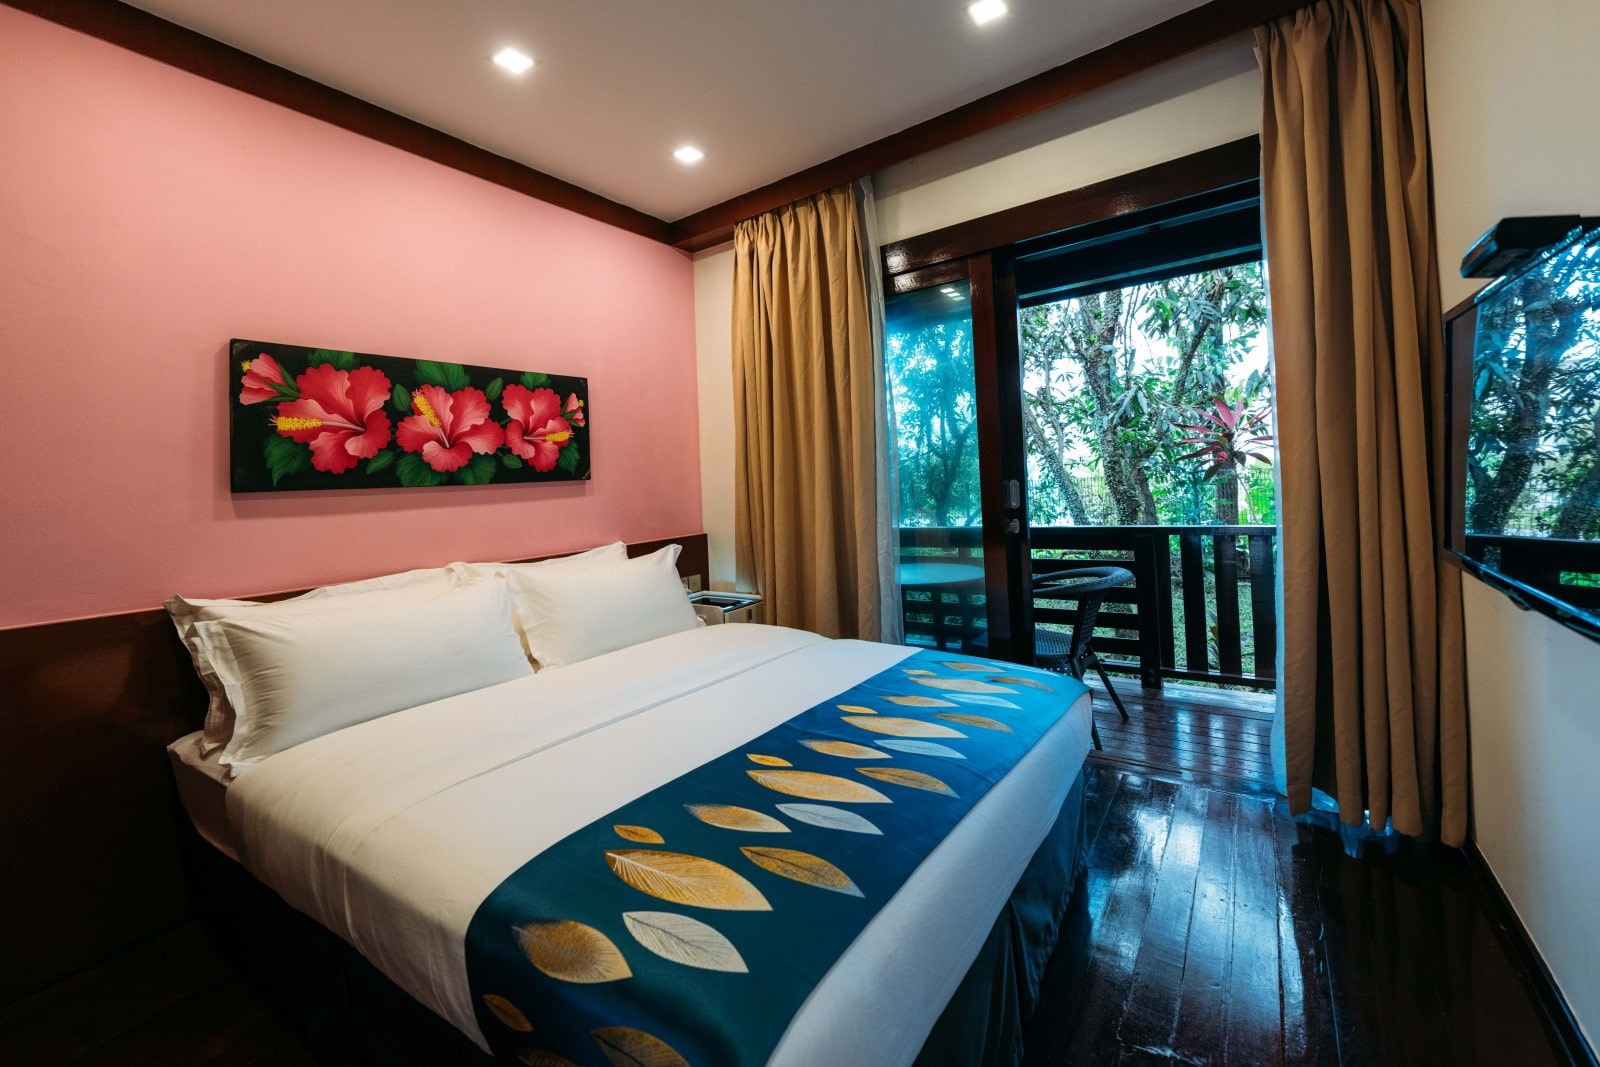 Pet-Friendly Hotels, Resorts, & Chalets in Singapore - Standard Room at the Kranji Sanctuary Resort